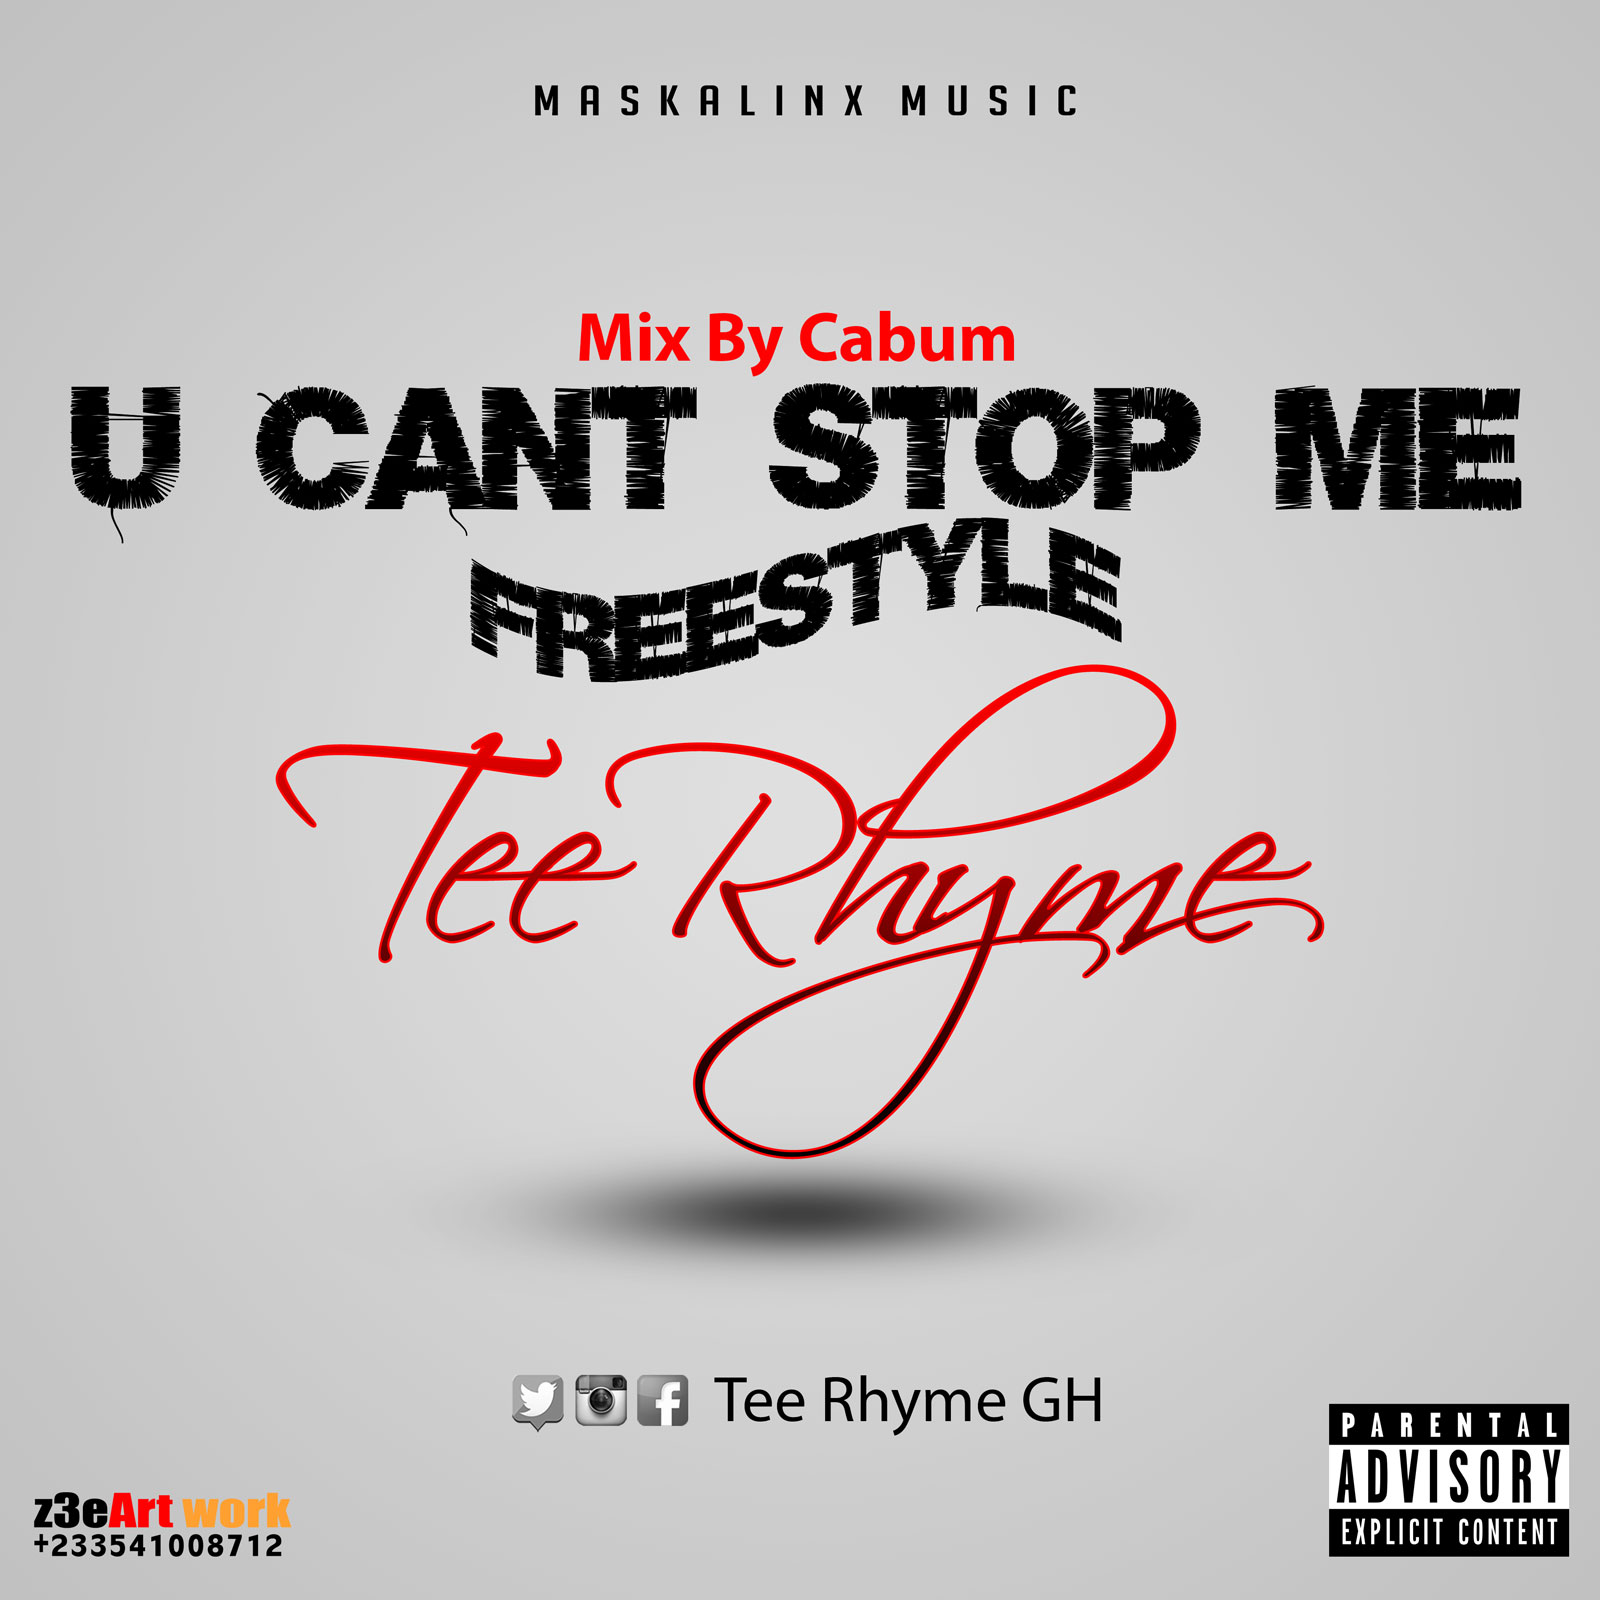 Tee Rhyme - U Cant Stop Me (still dre cover) Mixed by cabum 